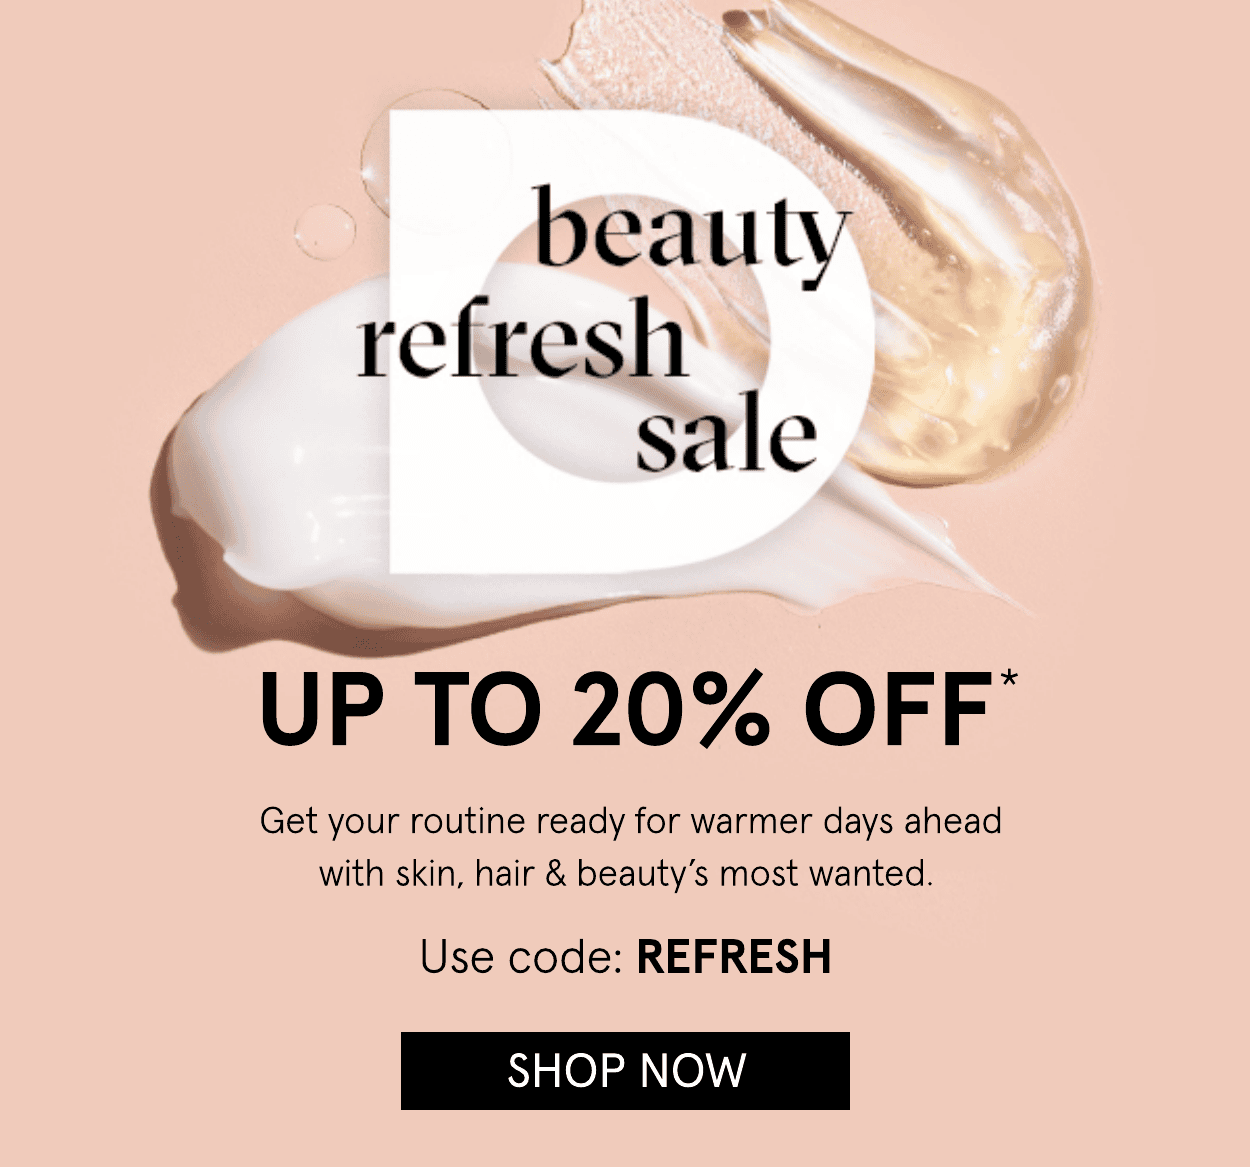 Early access 20% off with code: REFRESH